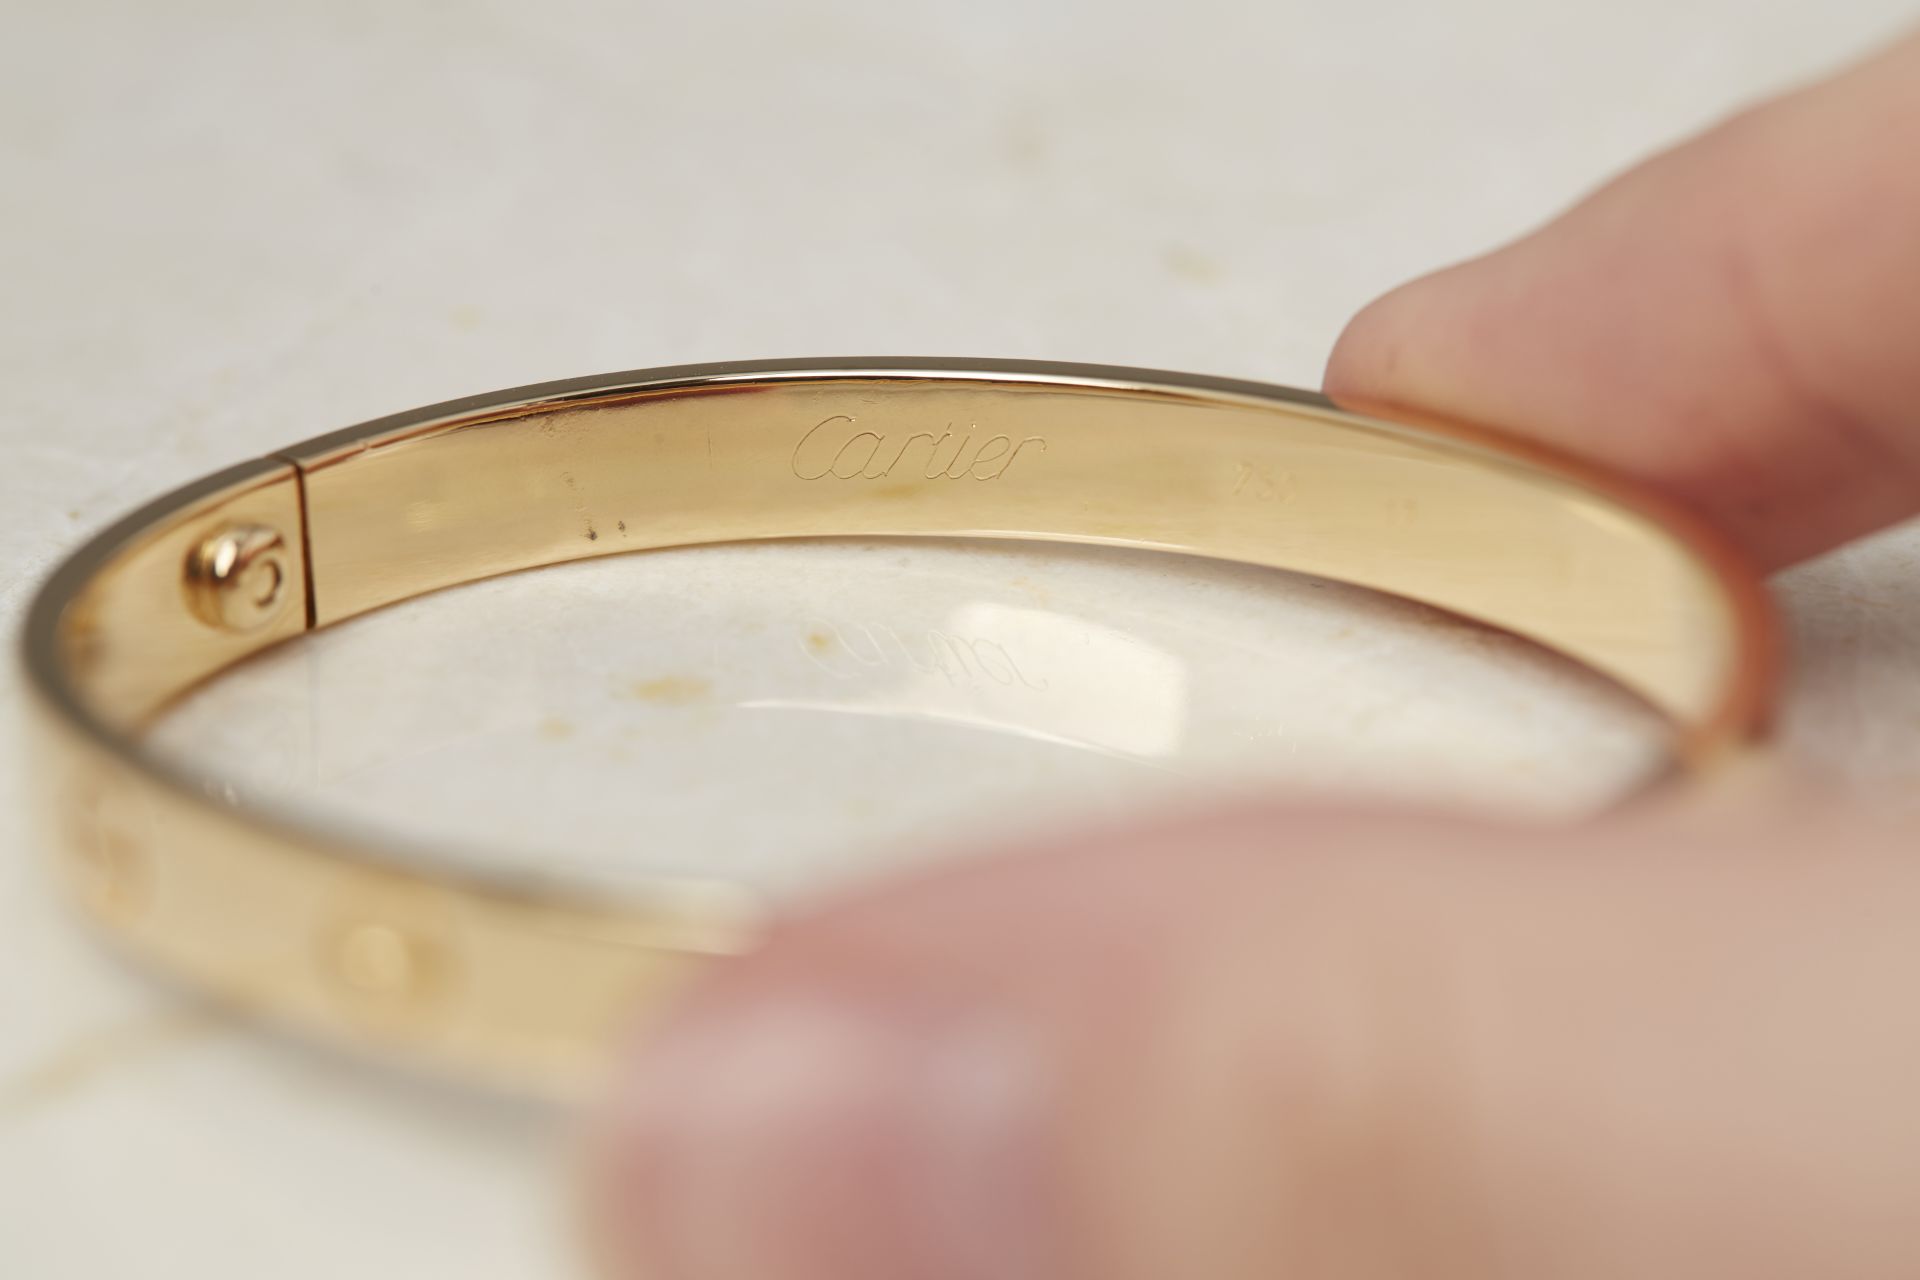 Cartier 18k Yellow Gold Love Bangle - Image 7 of 8